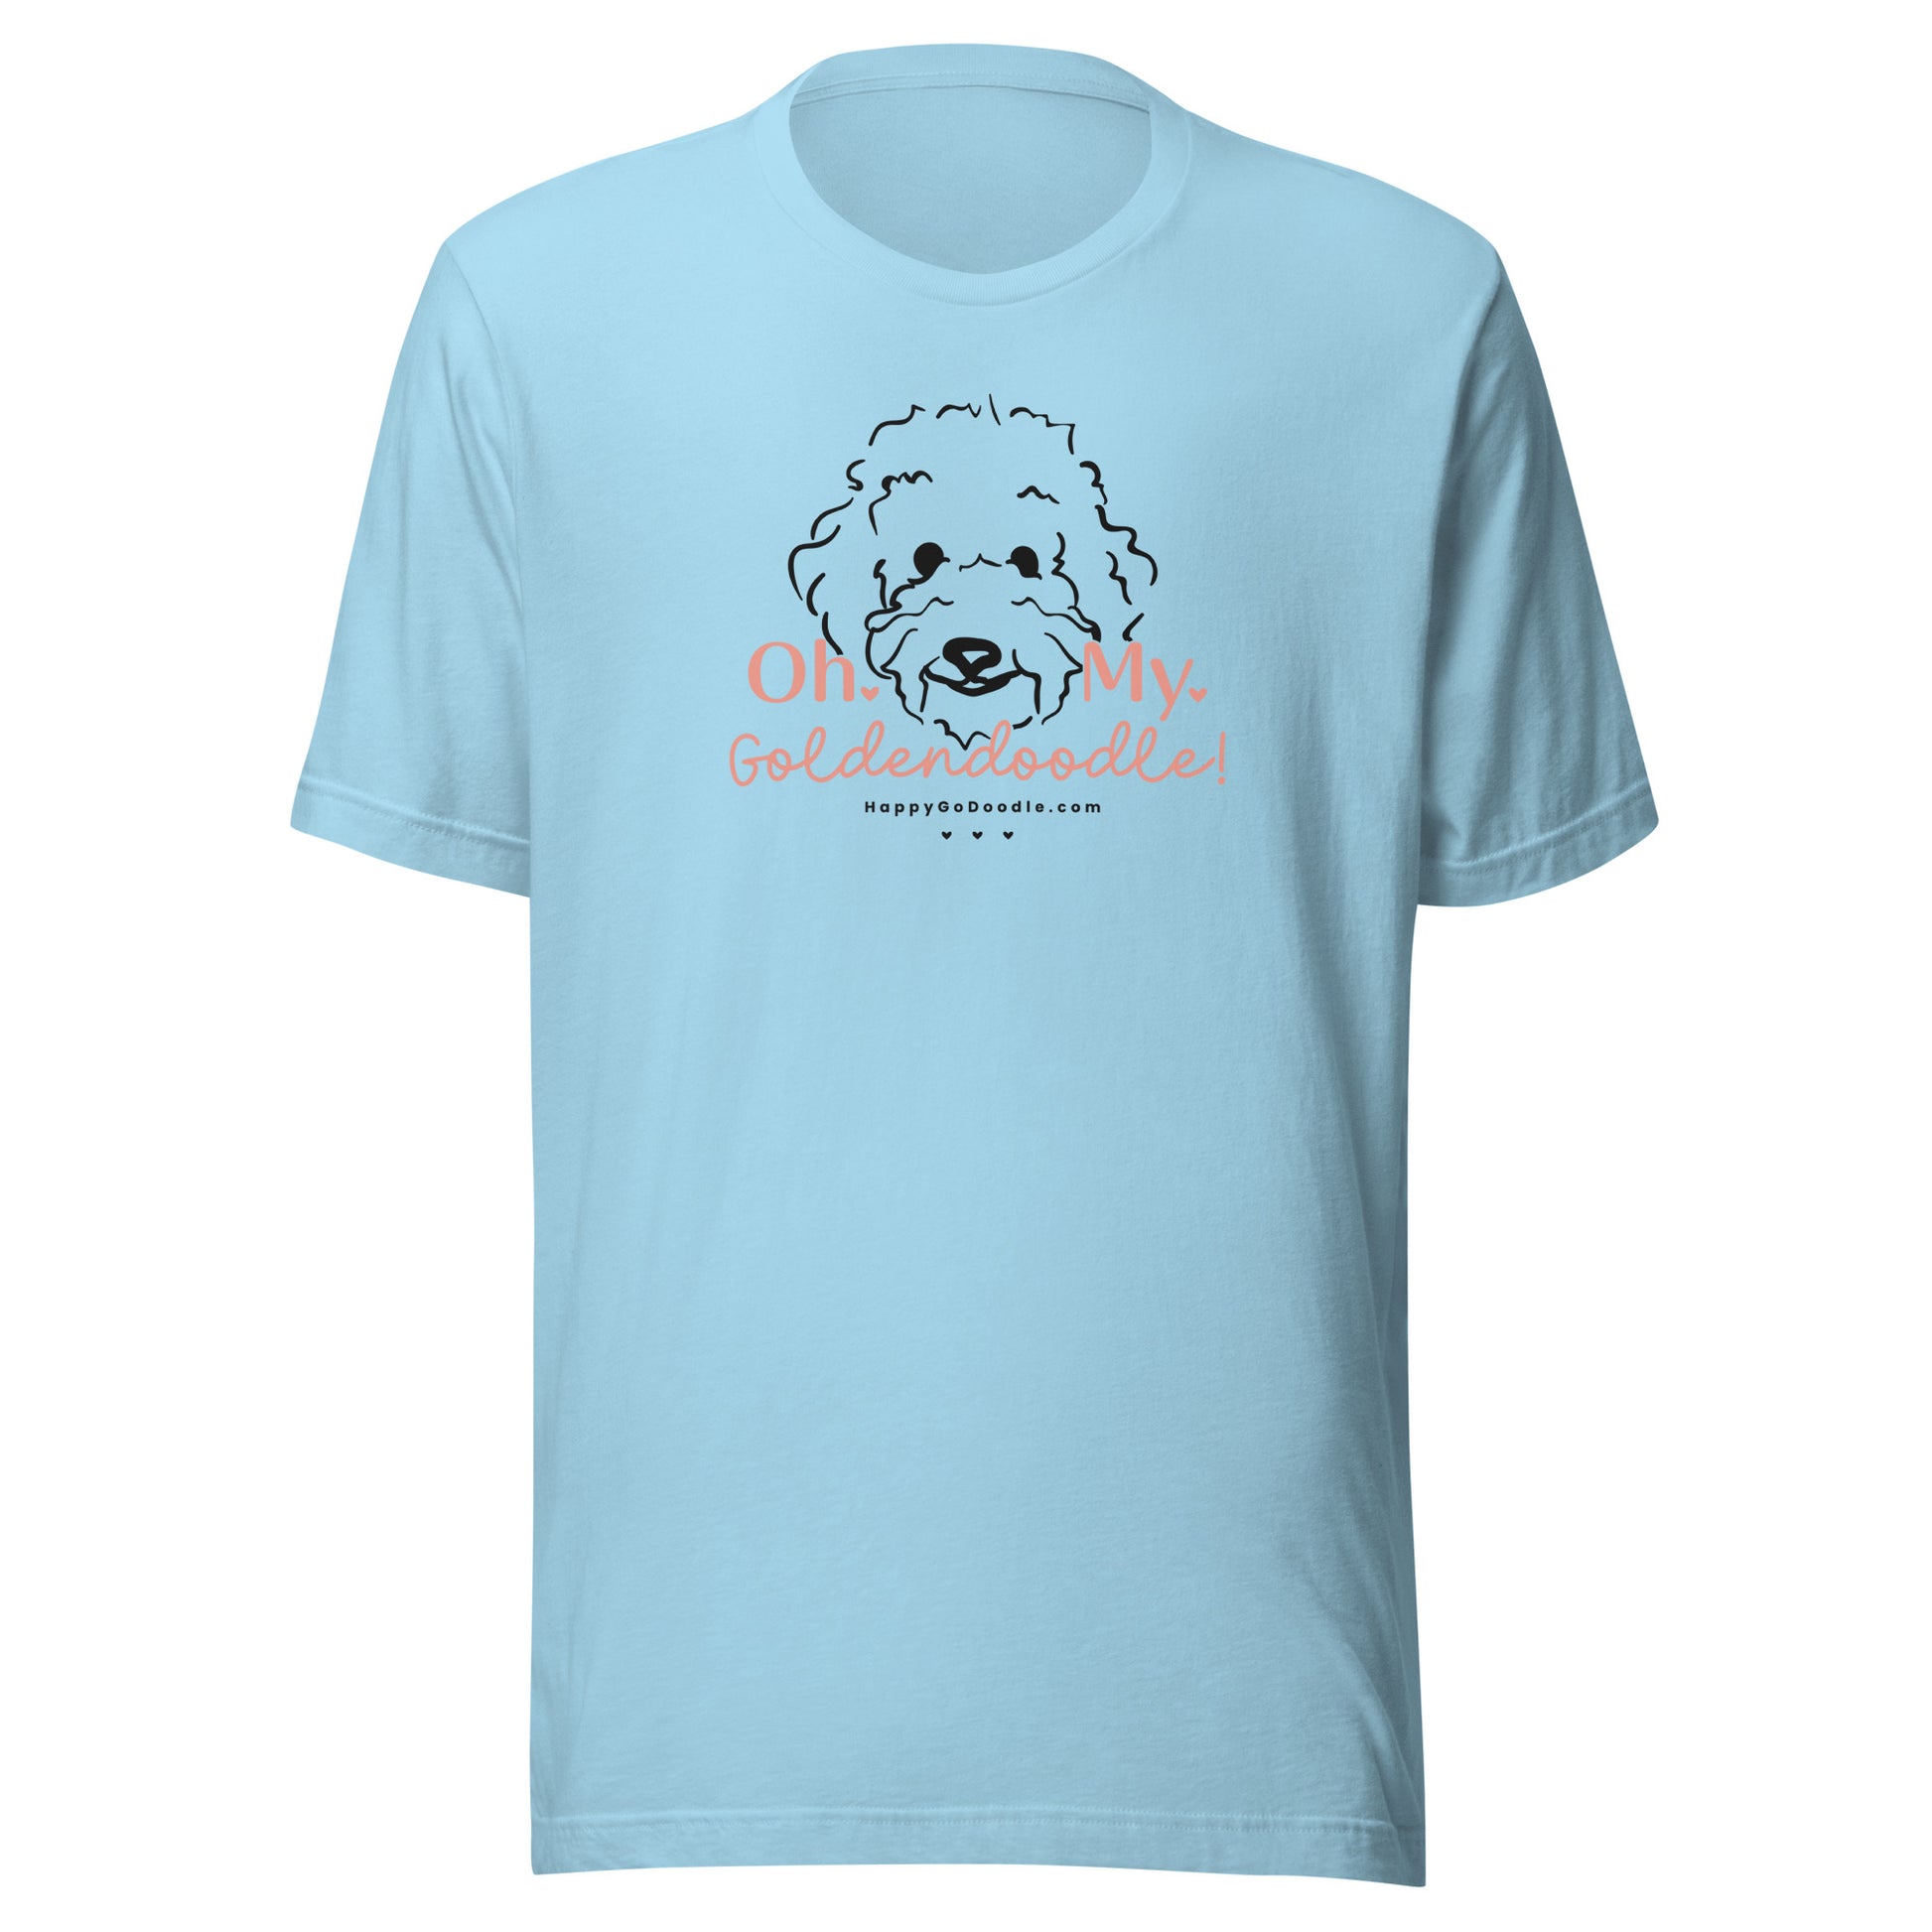 Goldendoodle t-shirt with Goldendoodle dog face and words "Oh My Goldendoodle" in ocean blue color